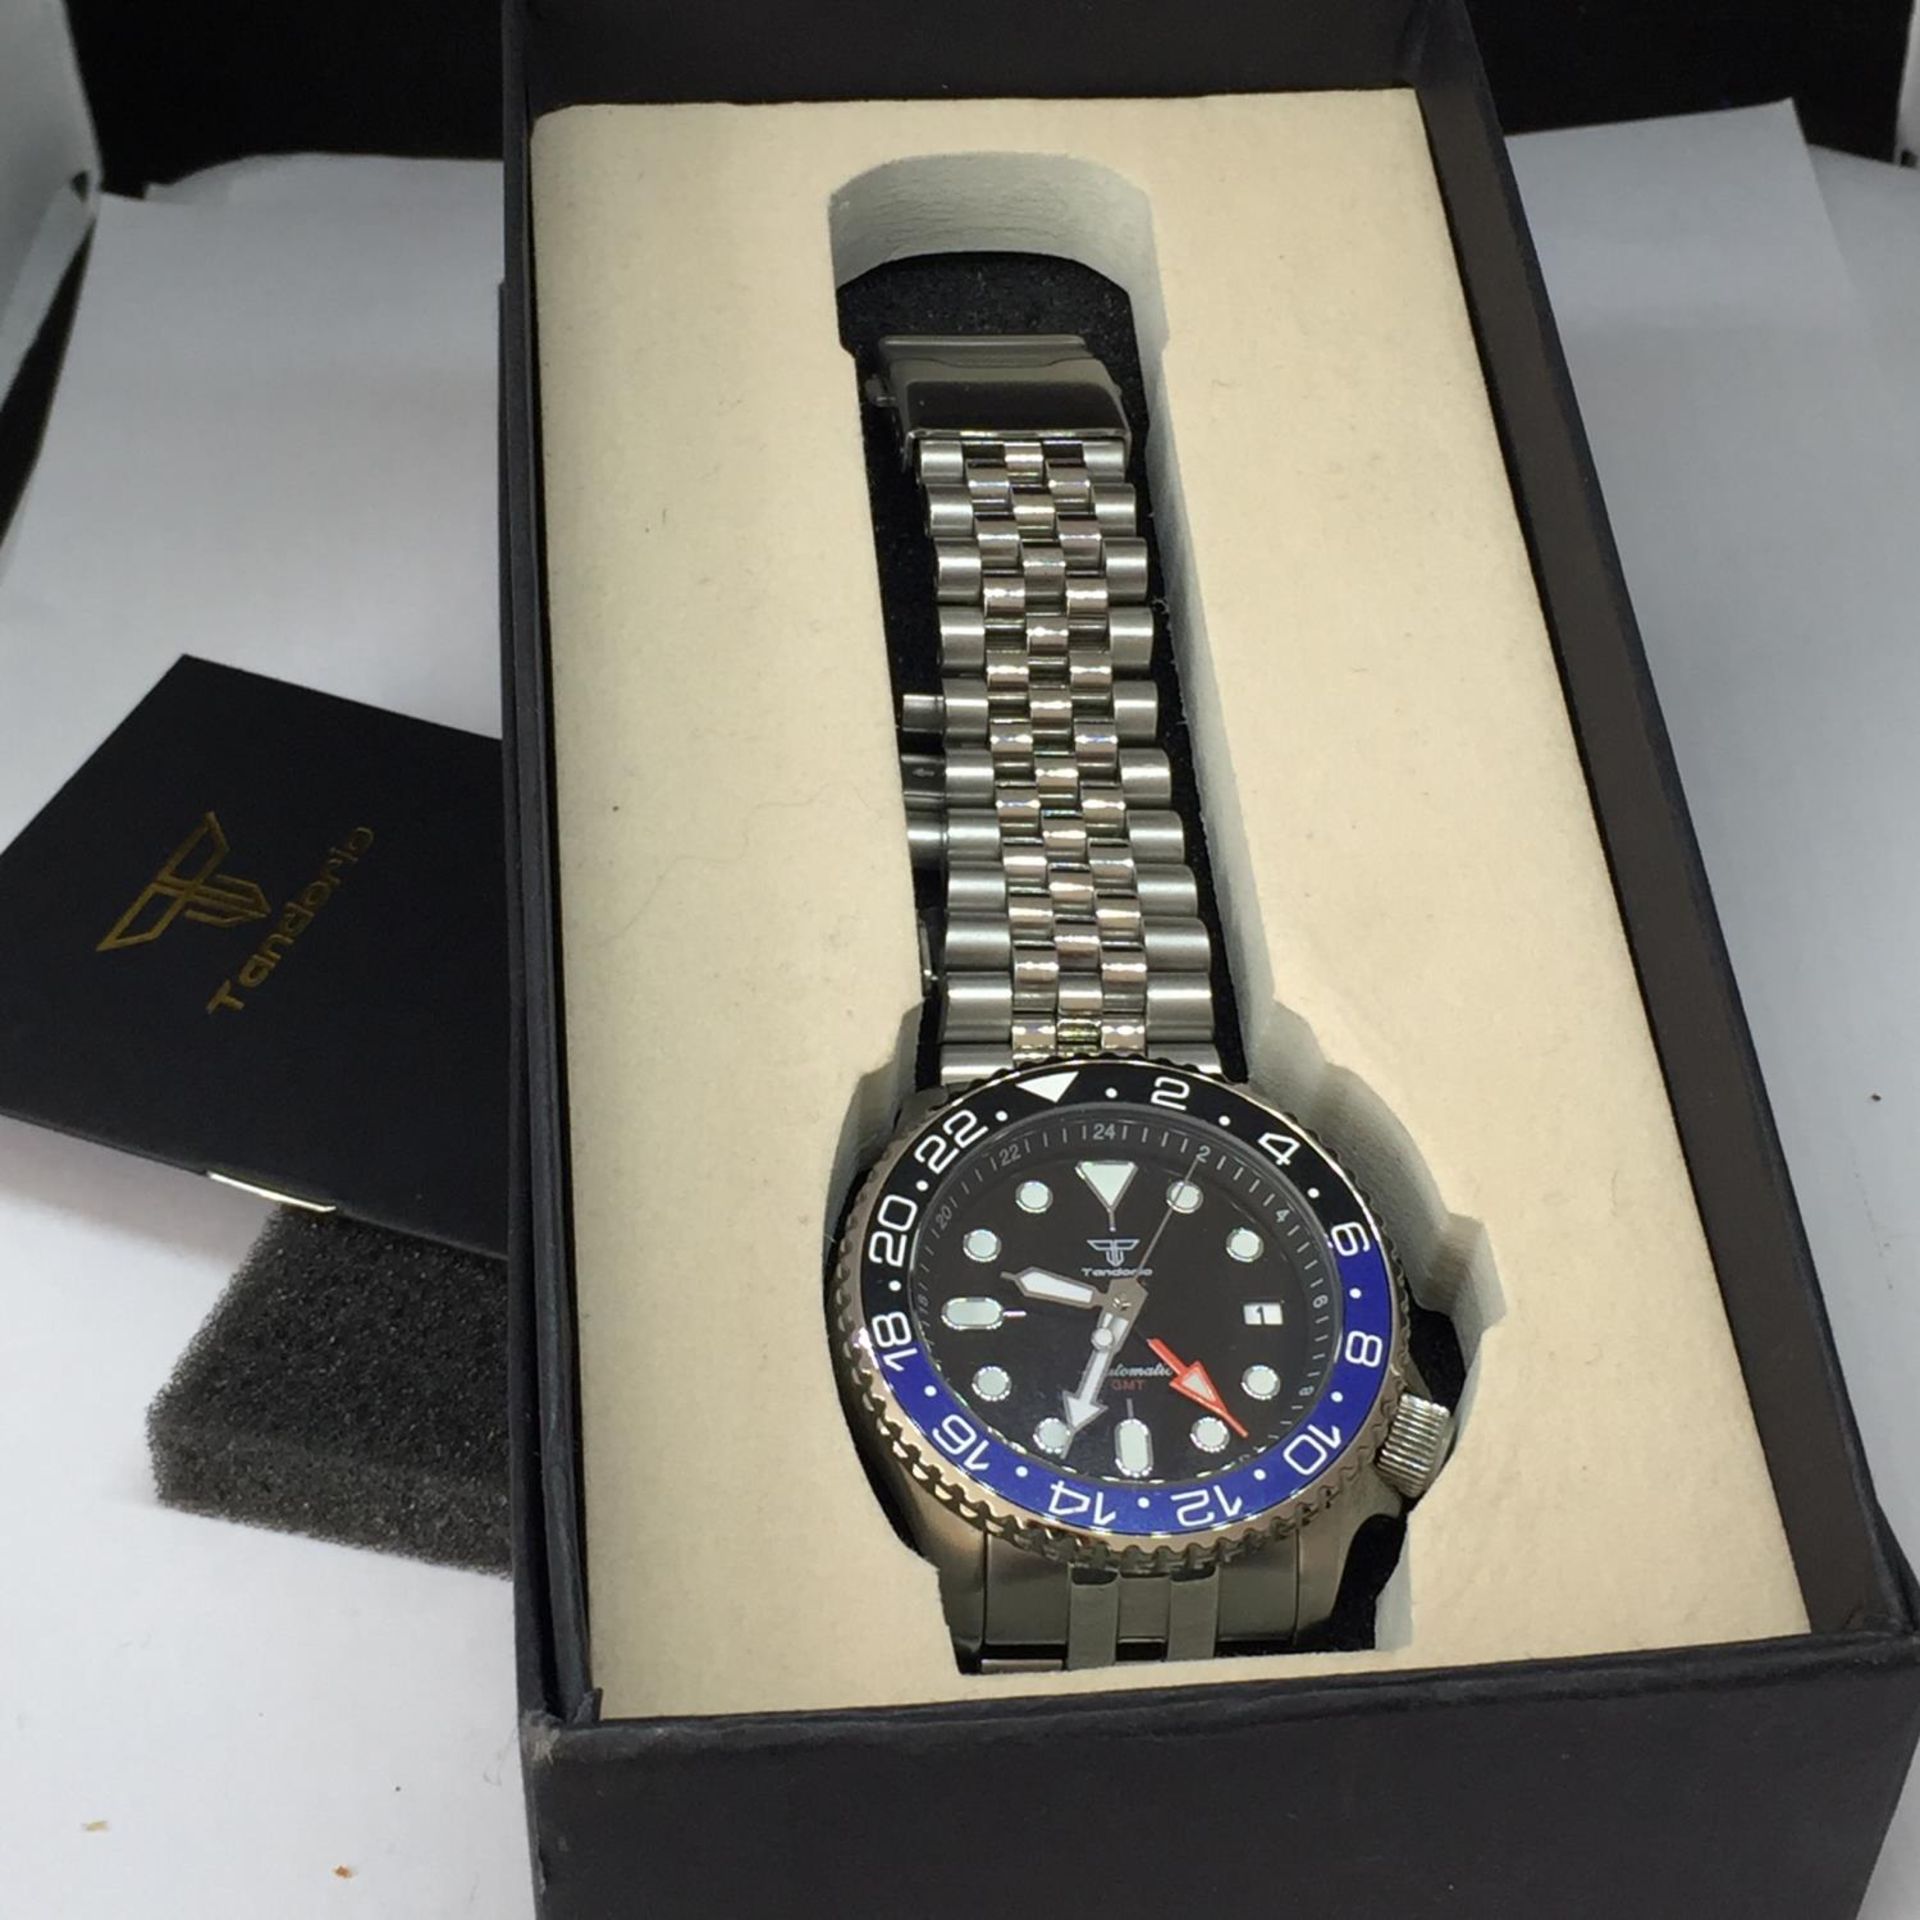 AN AS NEW AND BOXED TANDORIO WRIST WATCH SEEN WORKING BUT NO WARRANTY